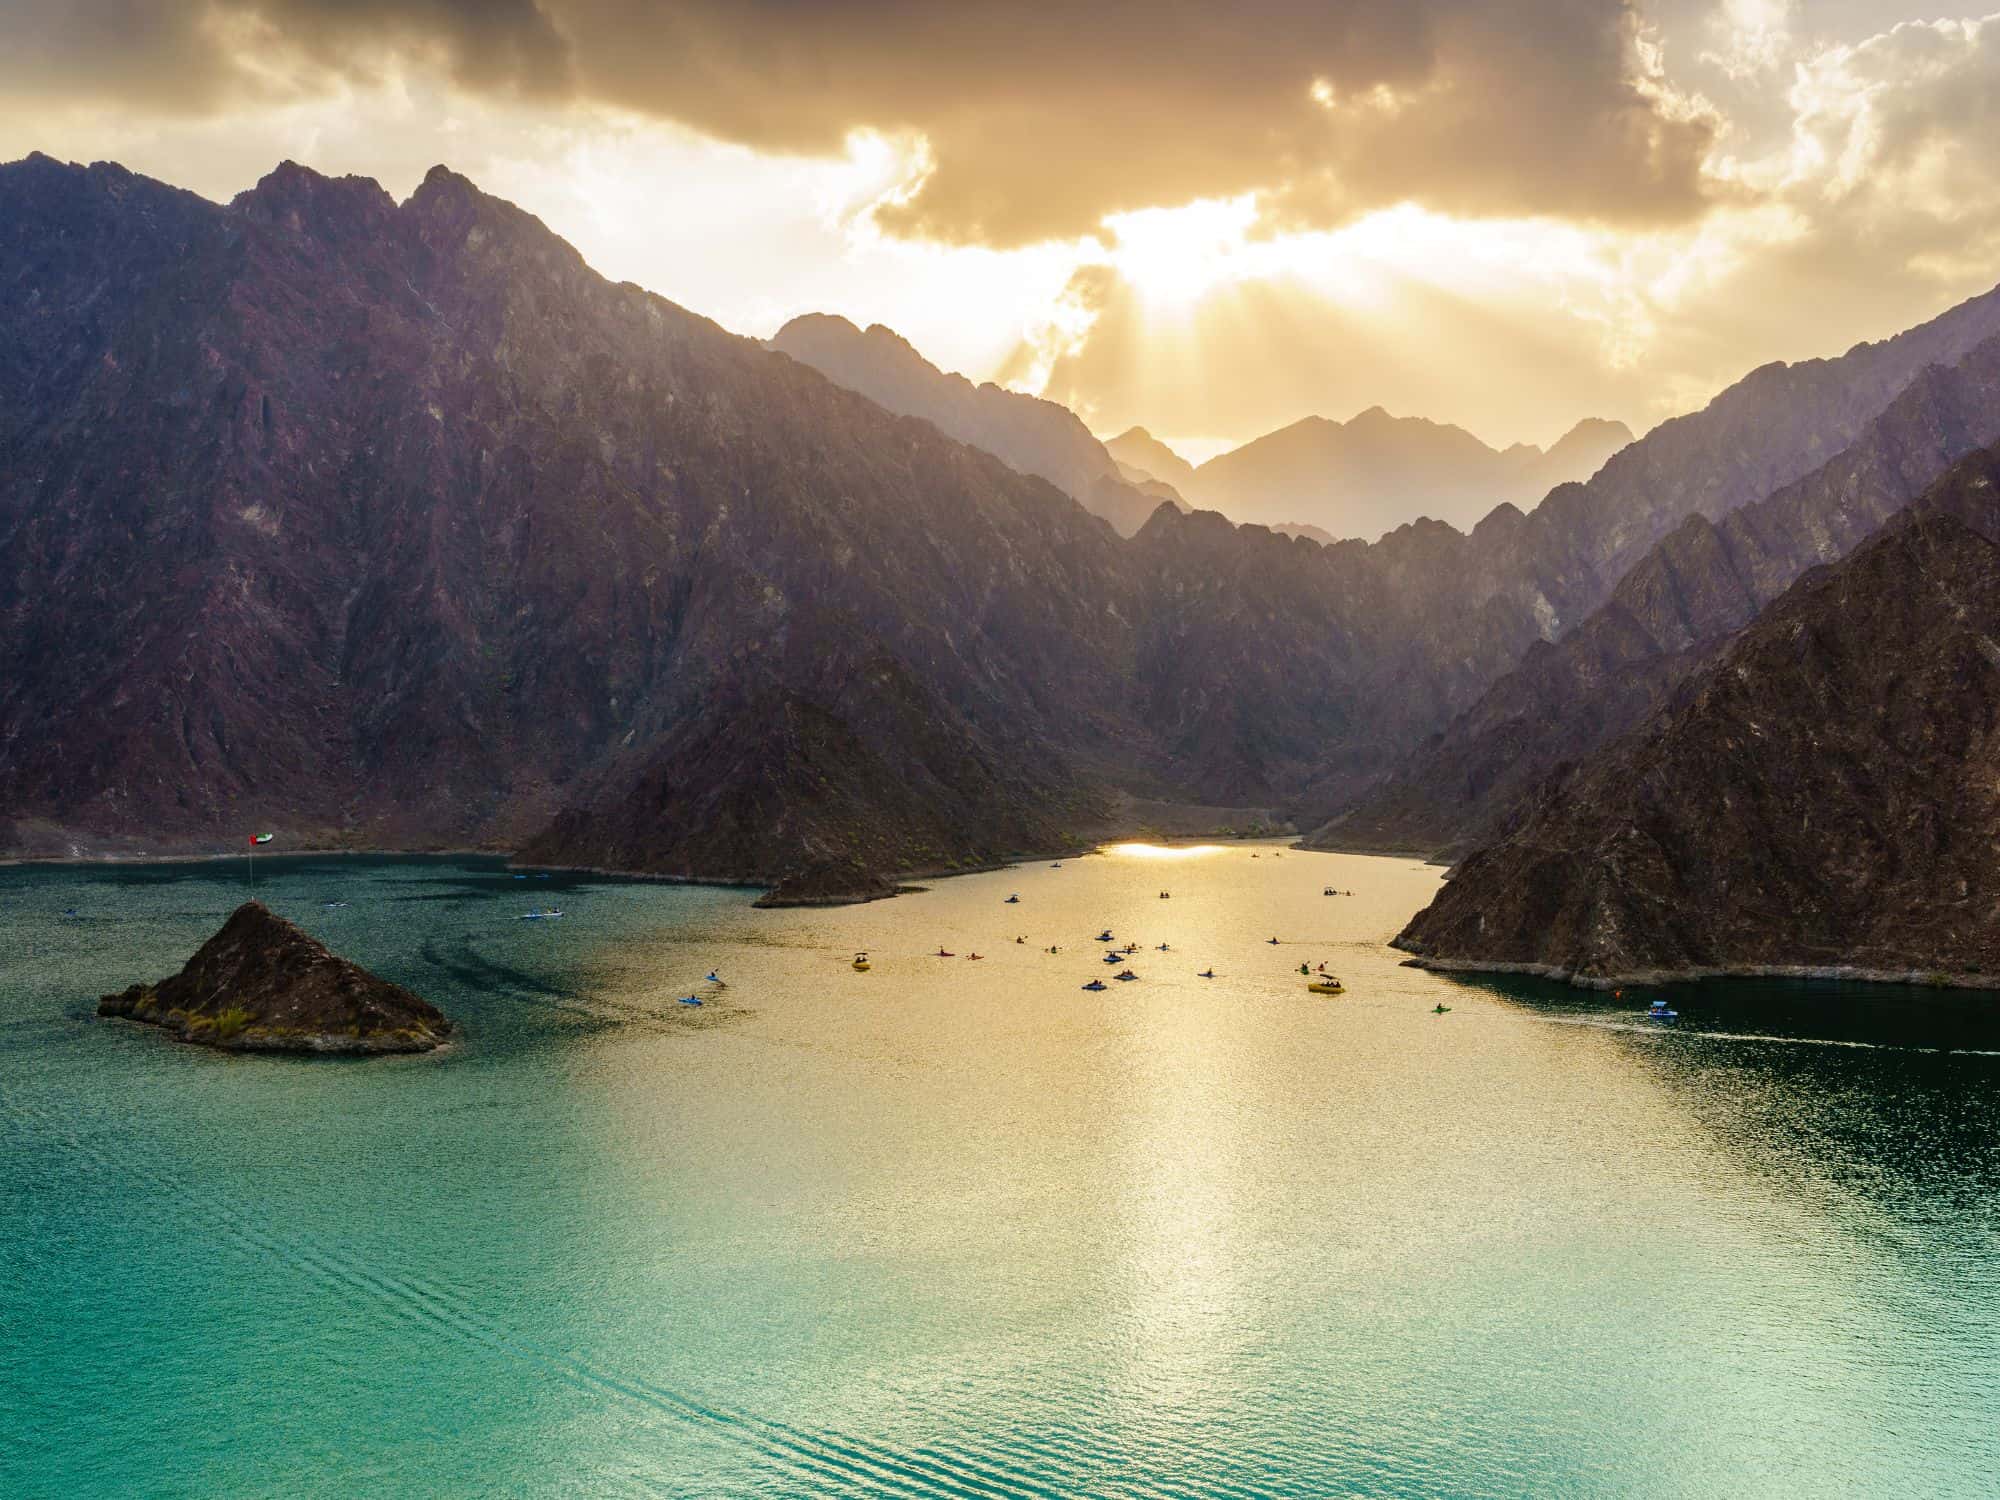 Best hidden gems in Dubai - the mountains and waters of Hatta